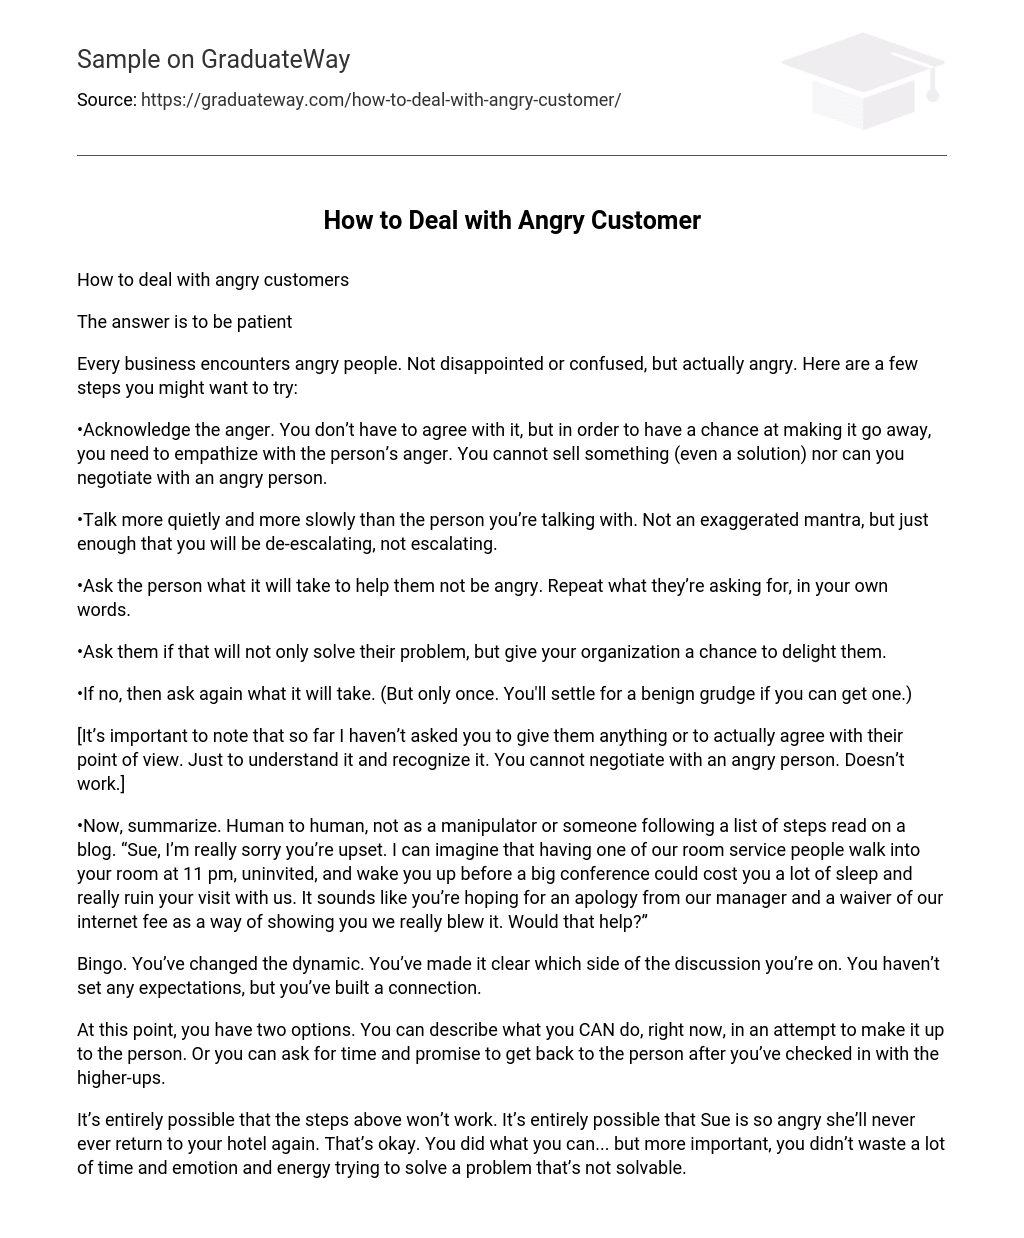 How to Deal with Angry Customer